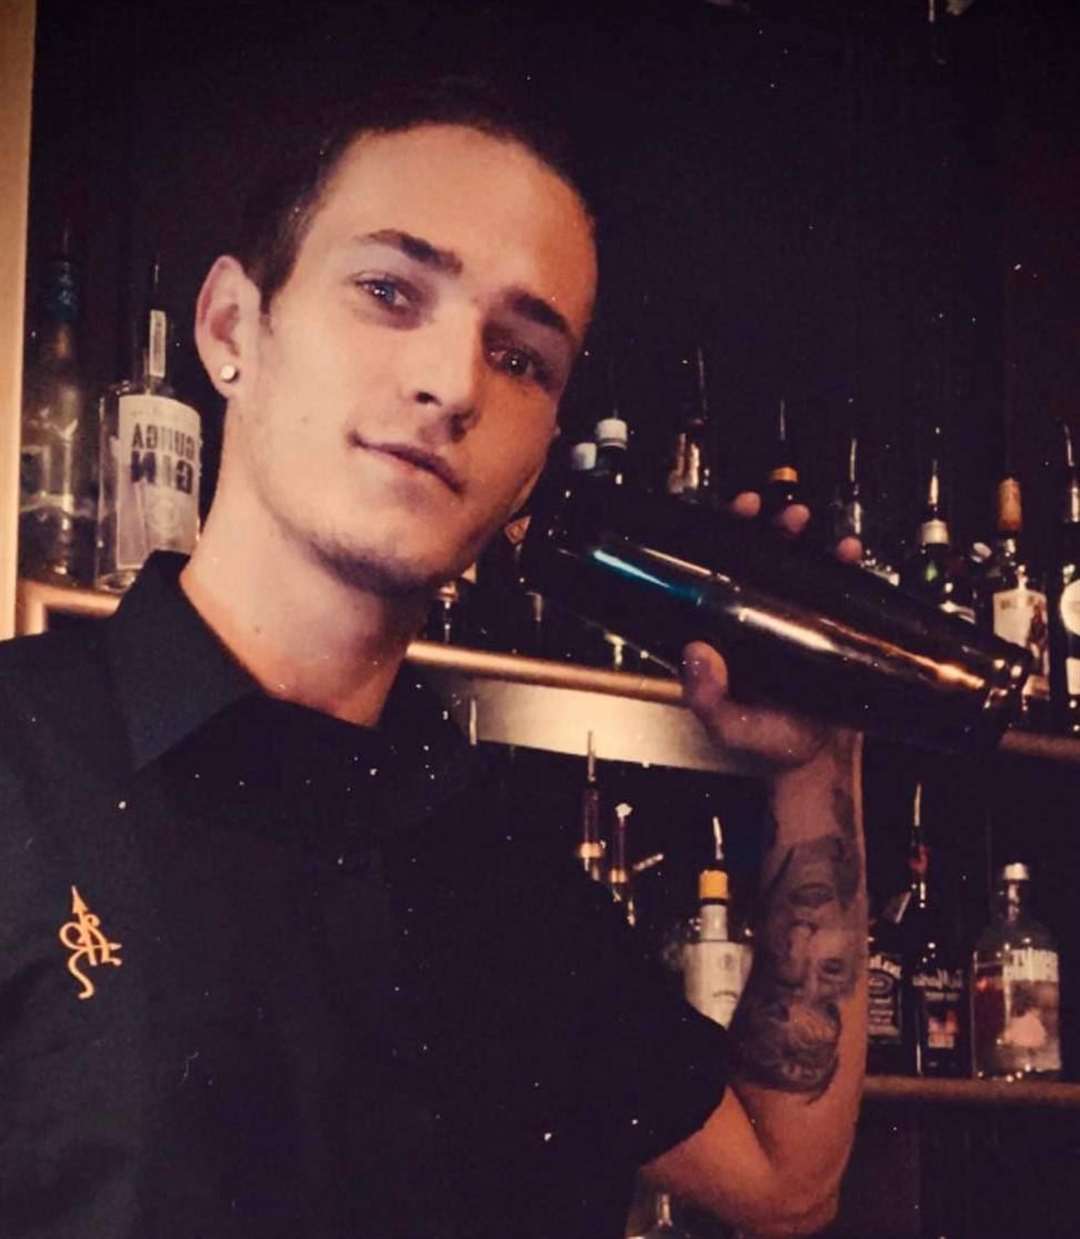 Barman Toby worked at many venues across east Kent